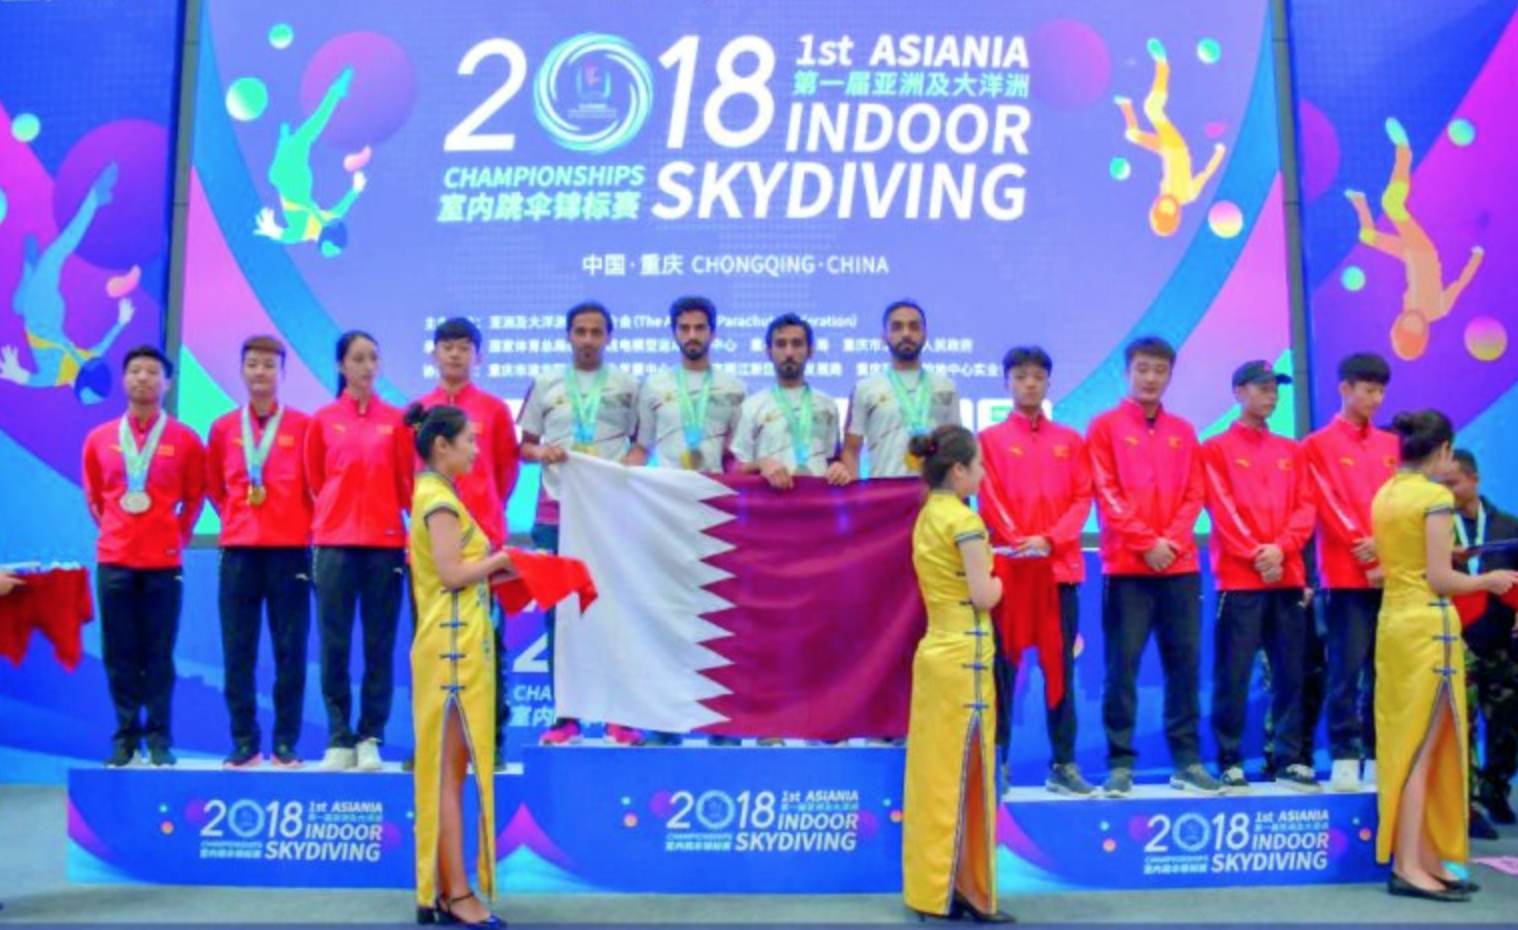 Qatar wins first place in Asiania Indoor Skydiving Championship